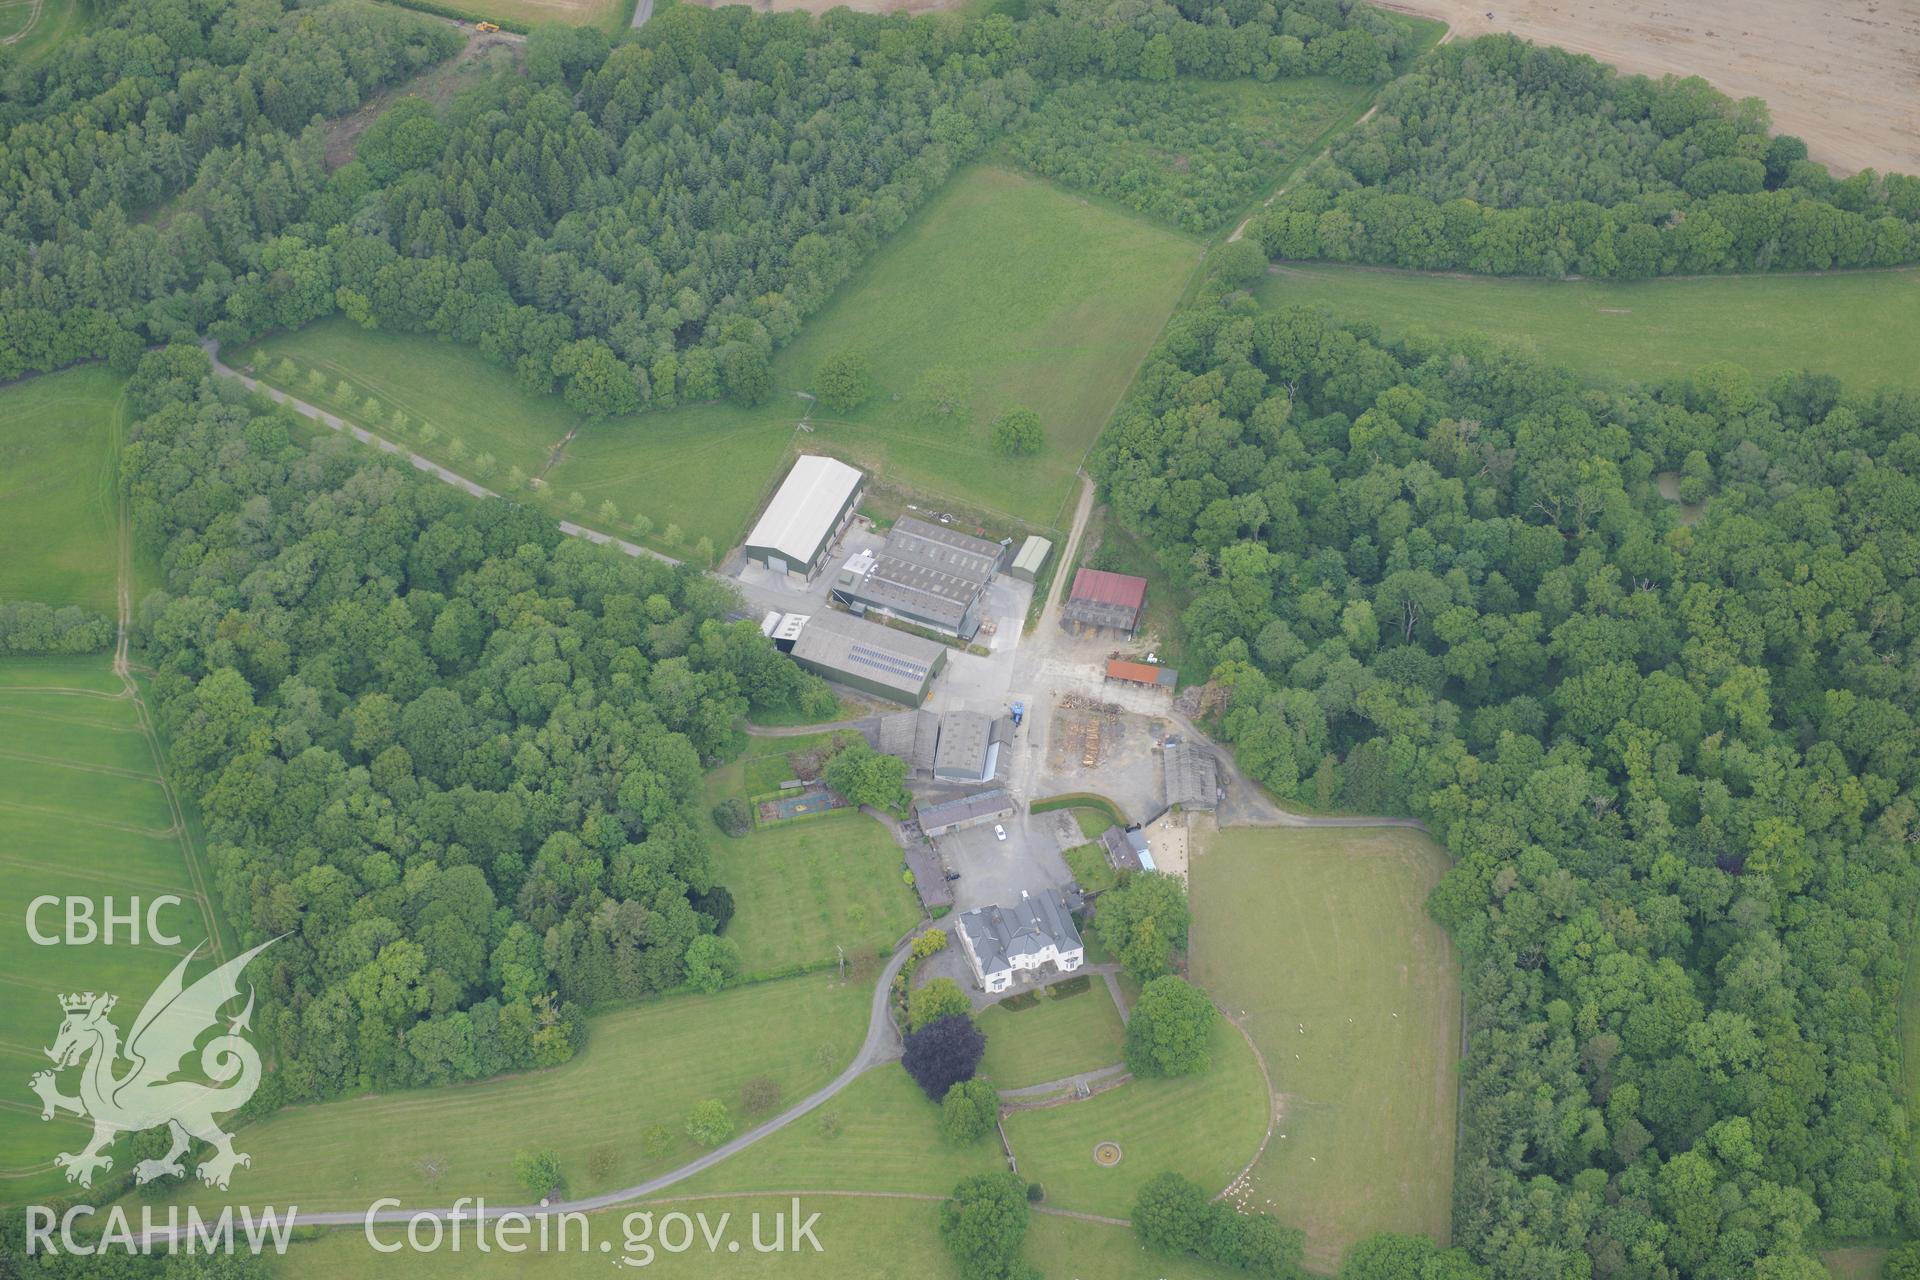 Hafod-Neddyn house and garden near Llandeilo. Oblique aerial photograph taken during the Royal Commission's programme of archaeological aerial reconnaissance by Toby Driver on 11th June 2015.